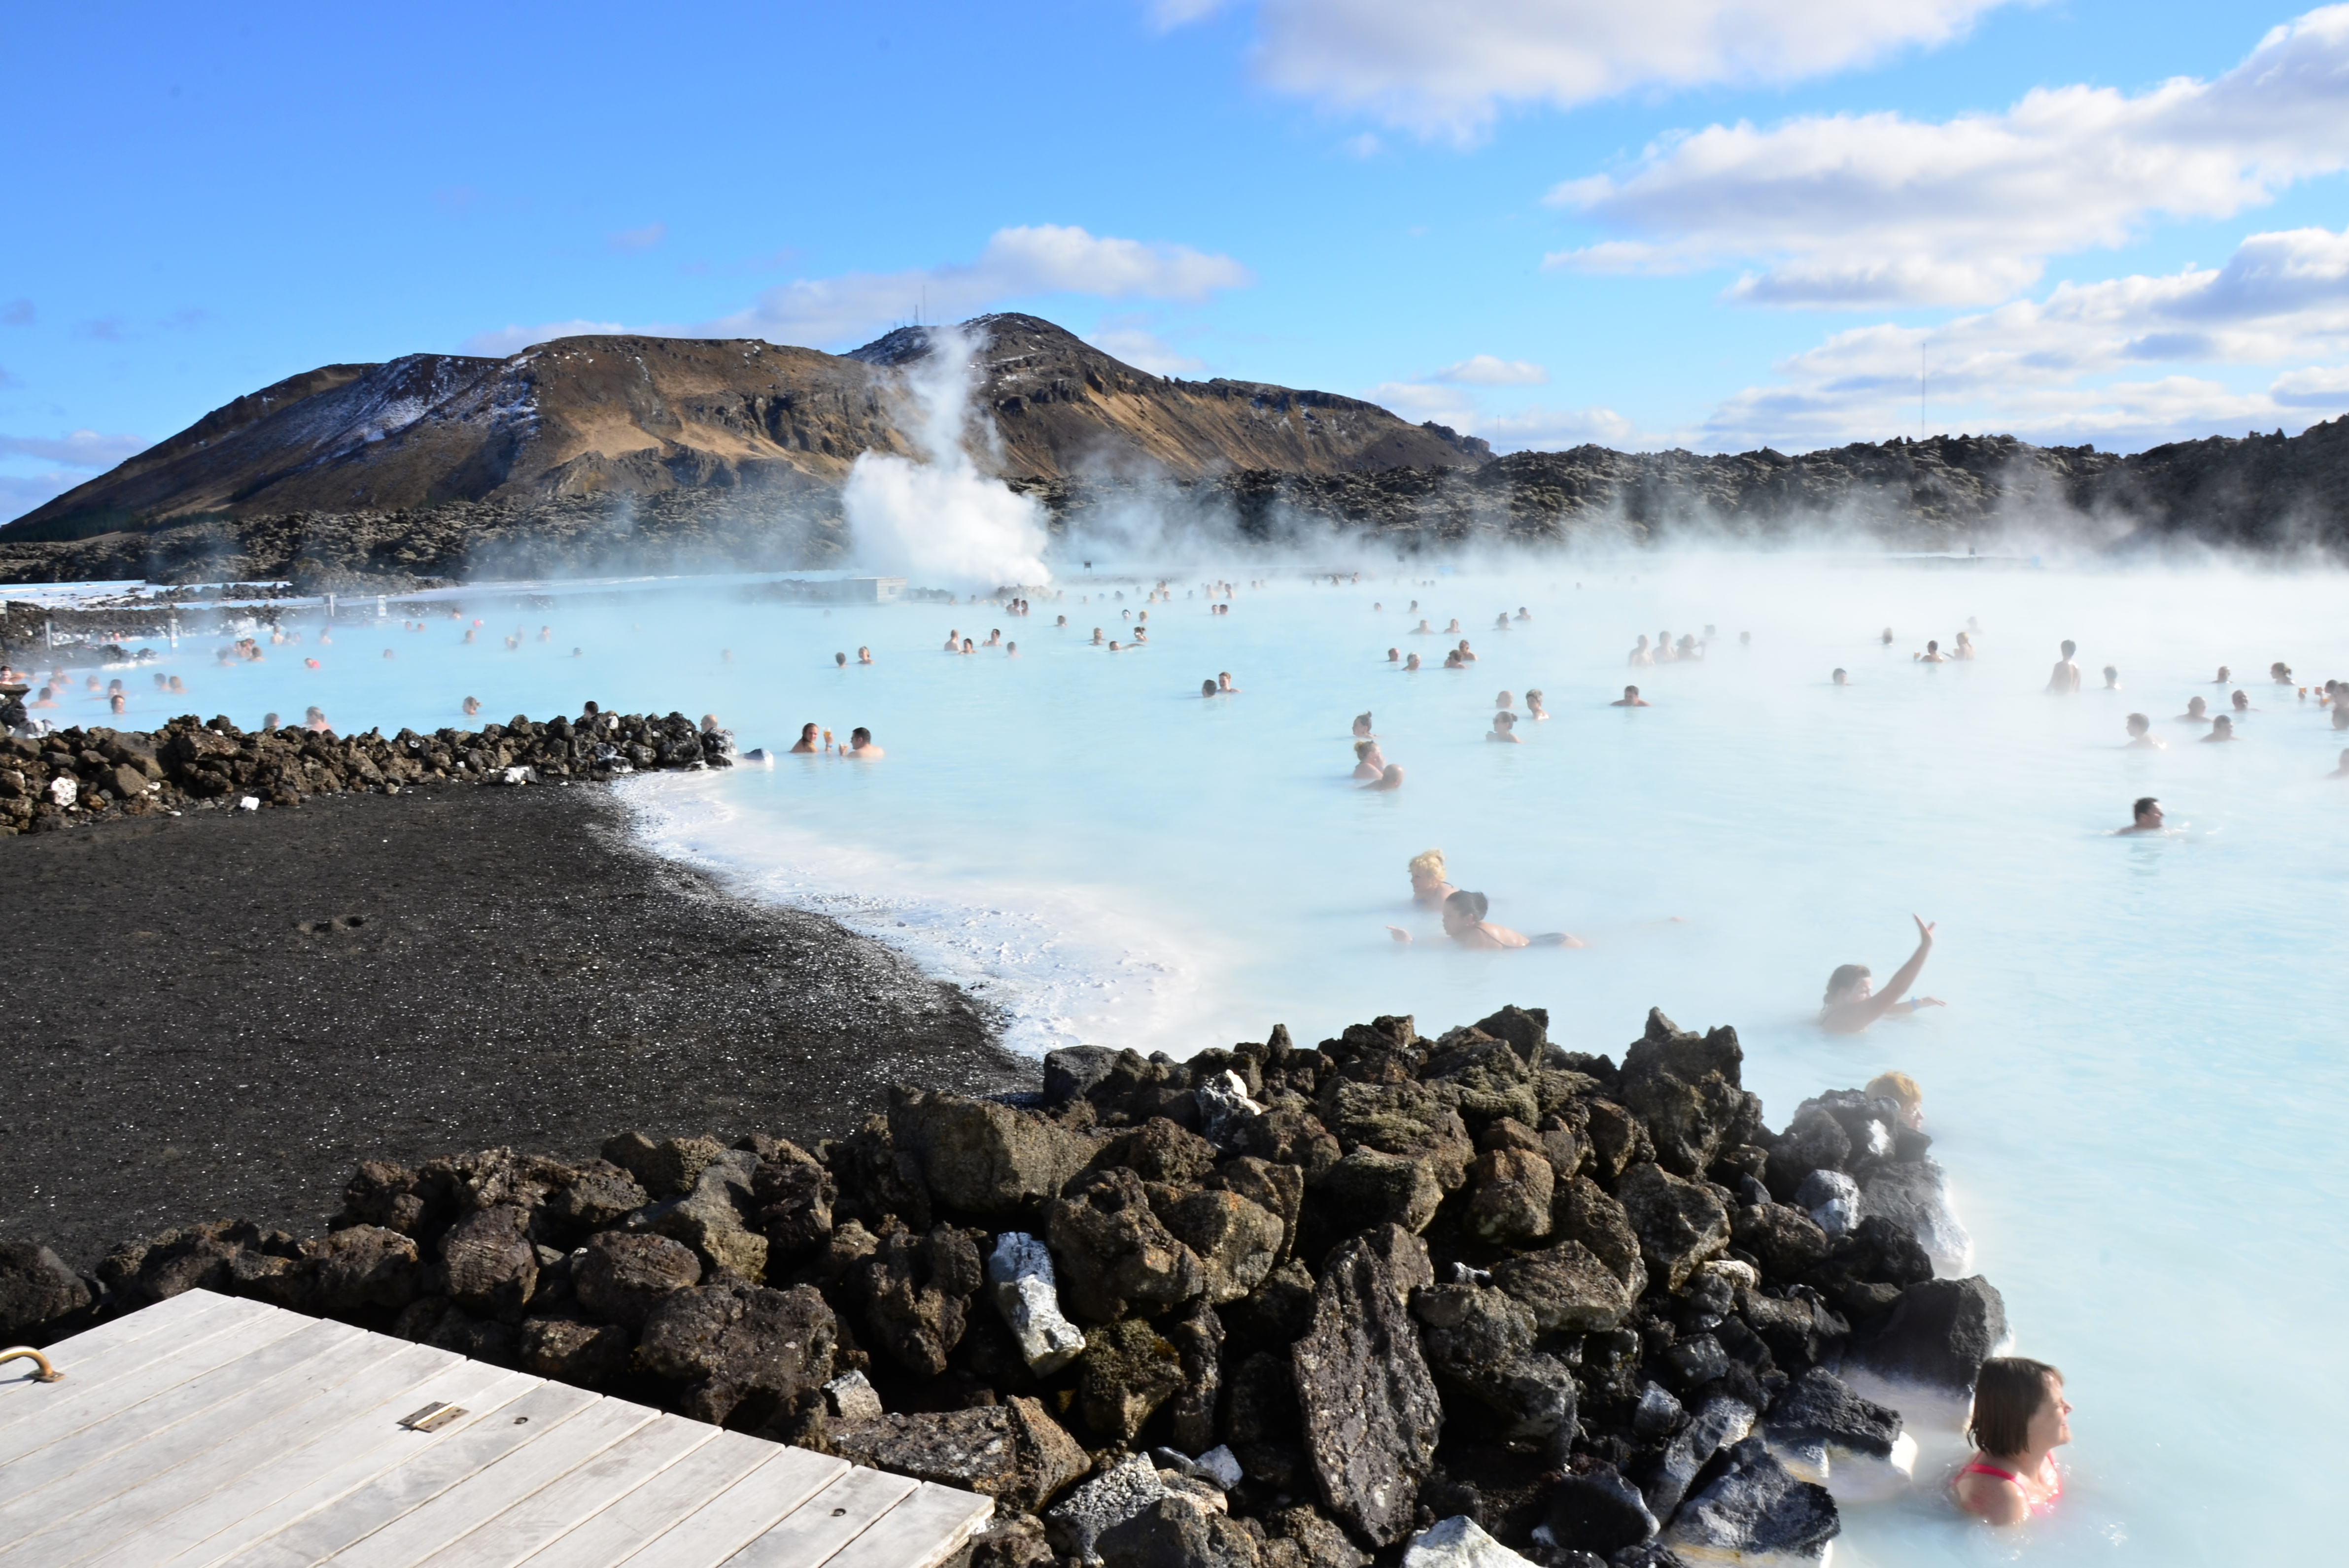 Incredible 9 Day Vacation in Iceland with Your Family - The Blue Lagoon